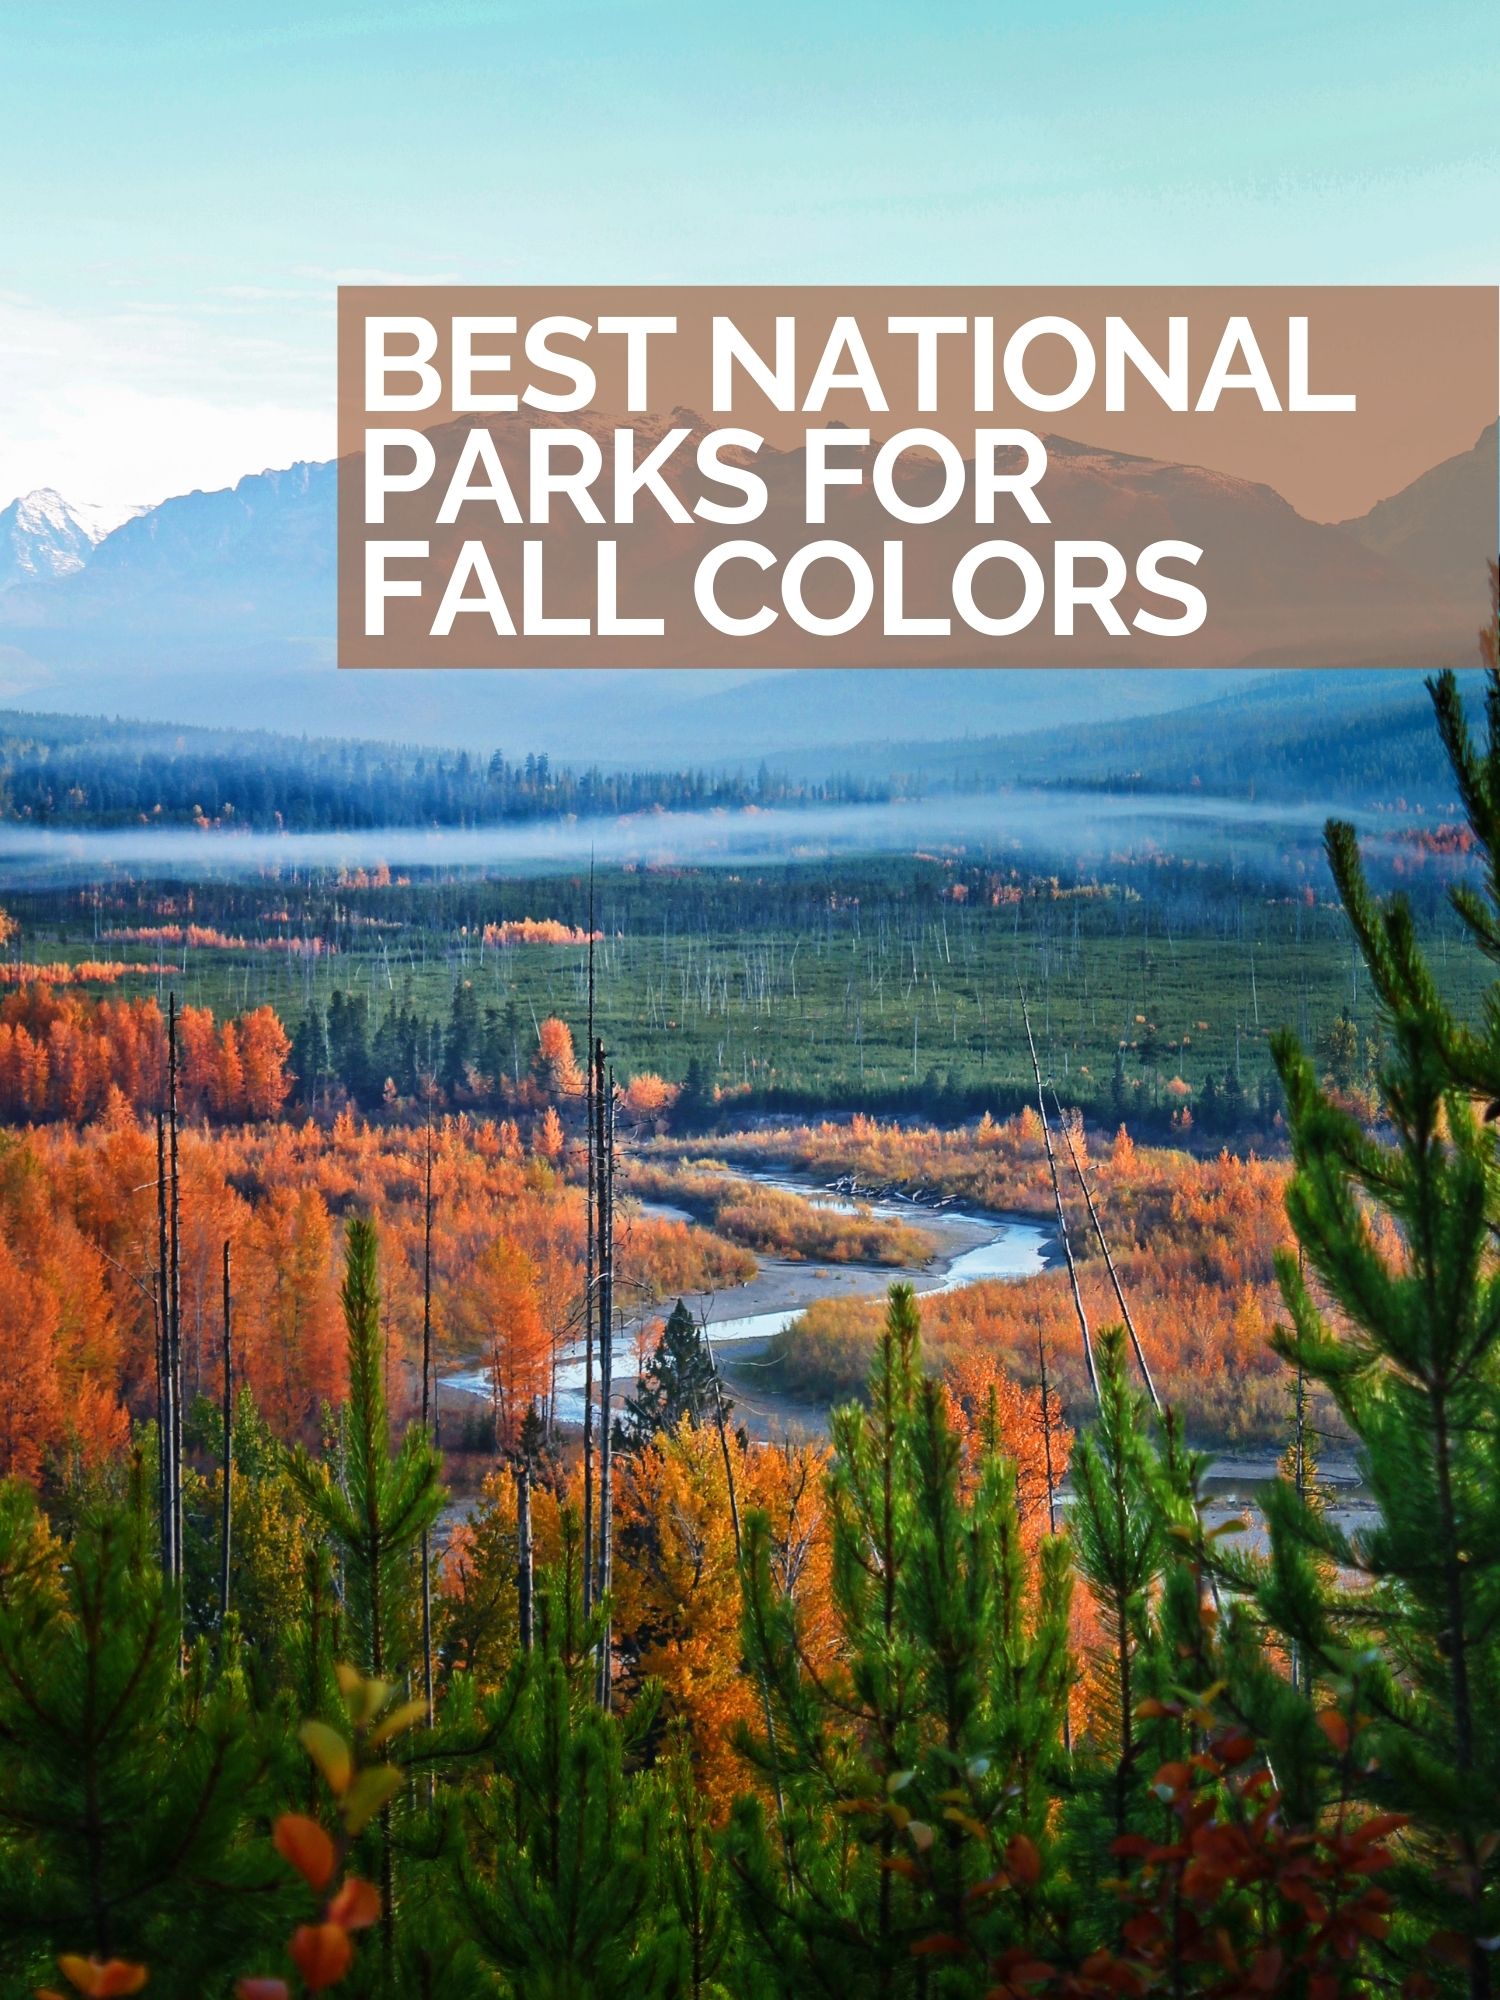 National Parks are a great place to enjoy fall colors. From the mountains of Glacier National Park to the hills of the rolling hills of the Blue Ridge Parkway, these are the best National Parks to find autumn leaves and fall fun.